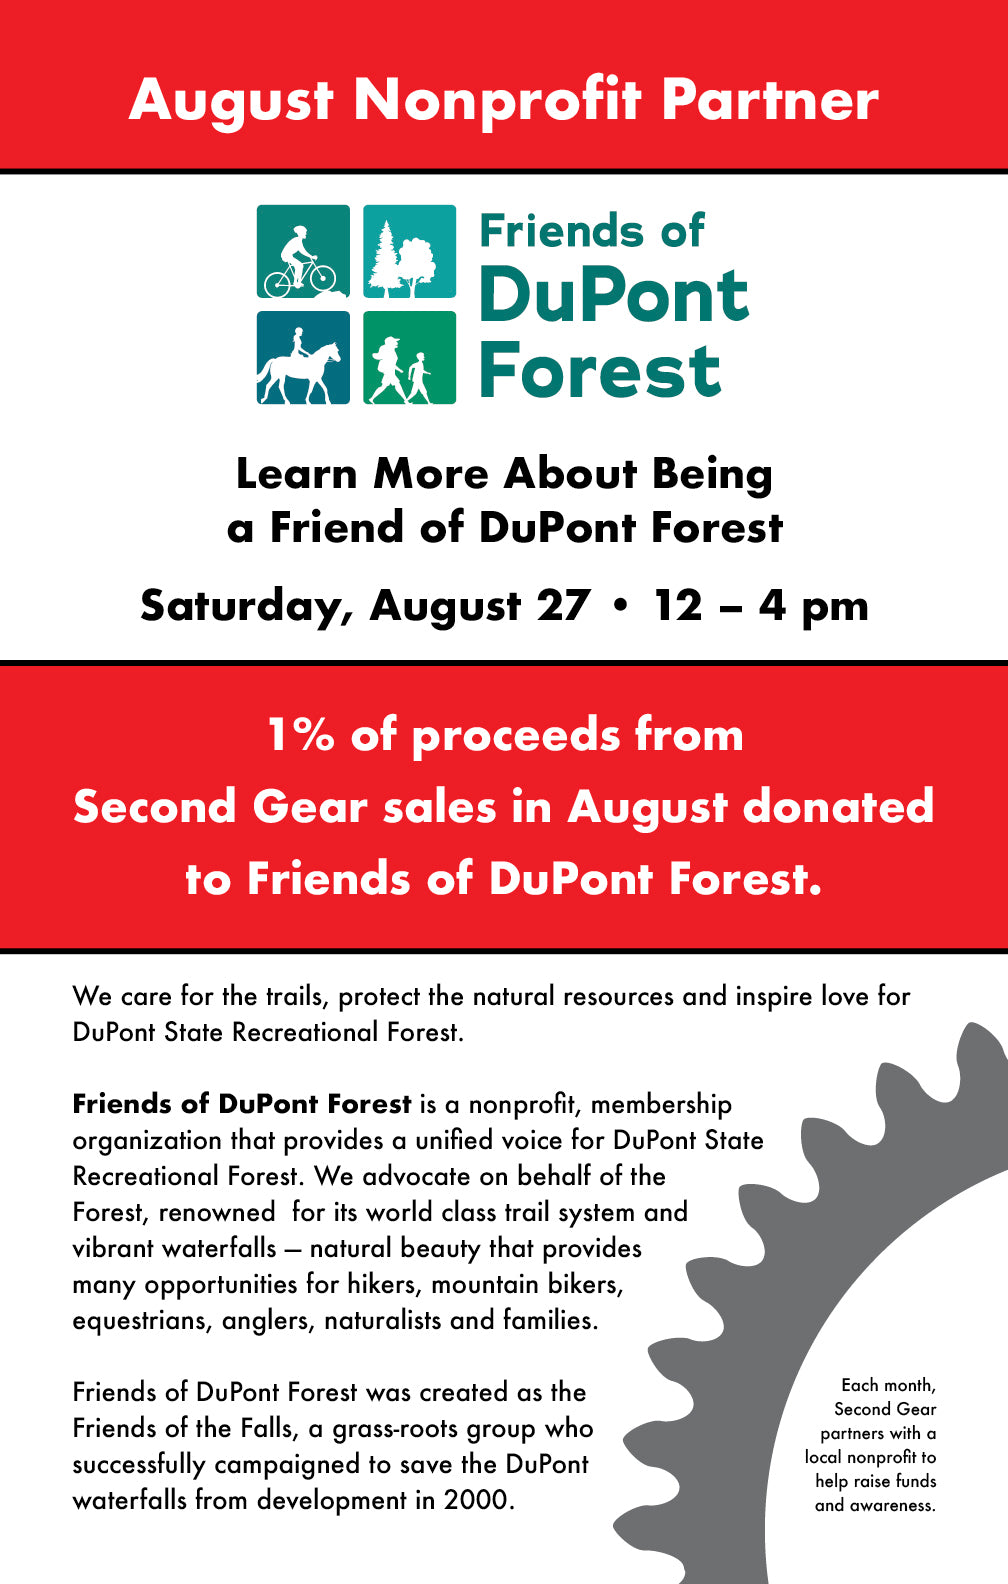 Second Gear's August Non-Profit: Friends of DuPont Forest